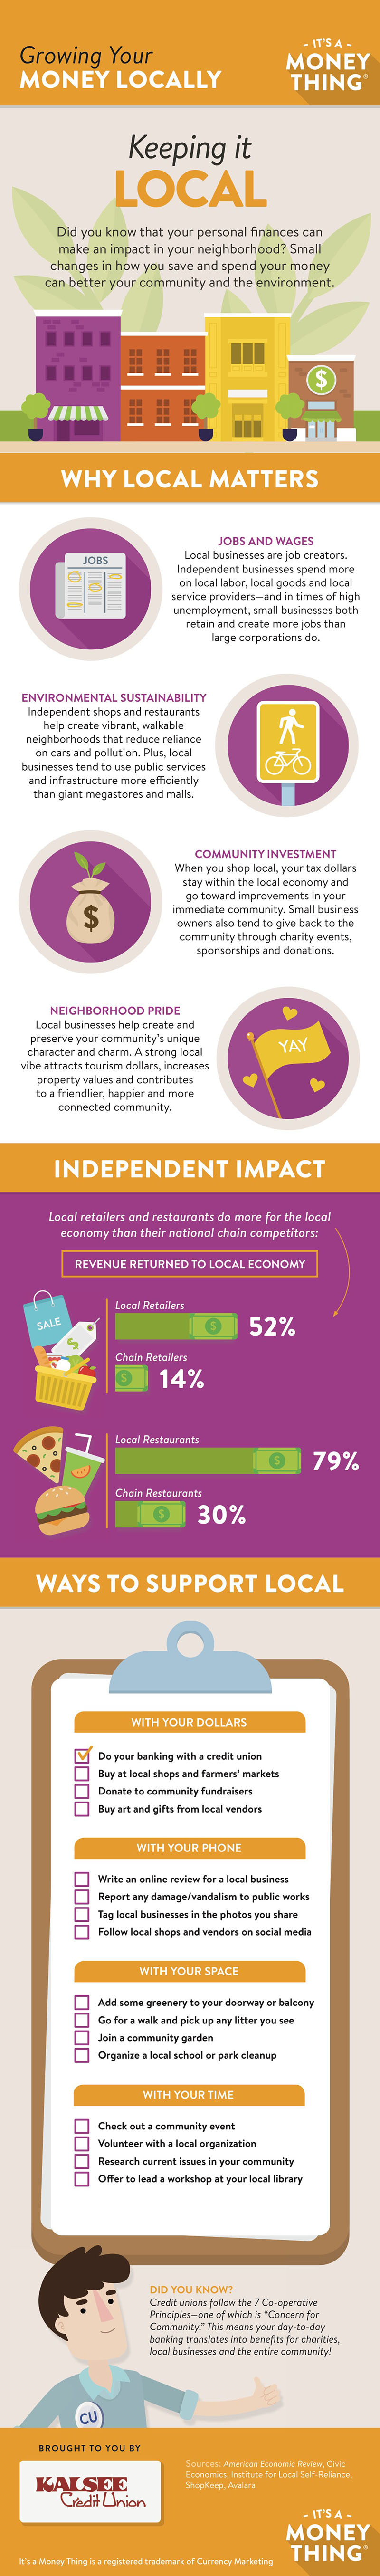 growing your money locally infographic, click for transcription